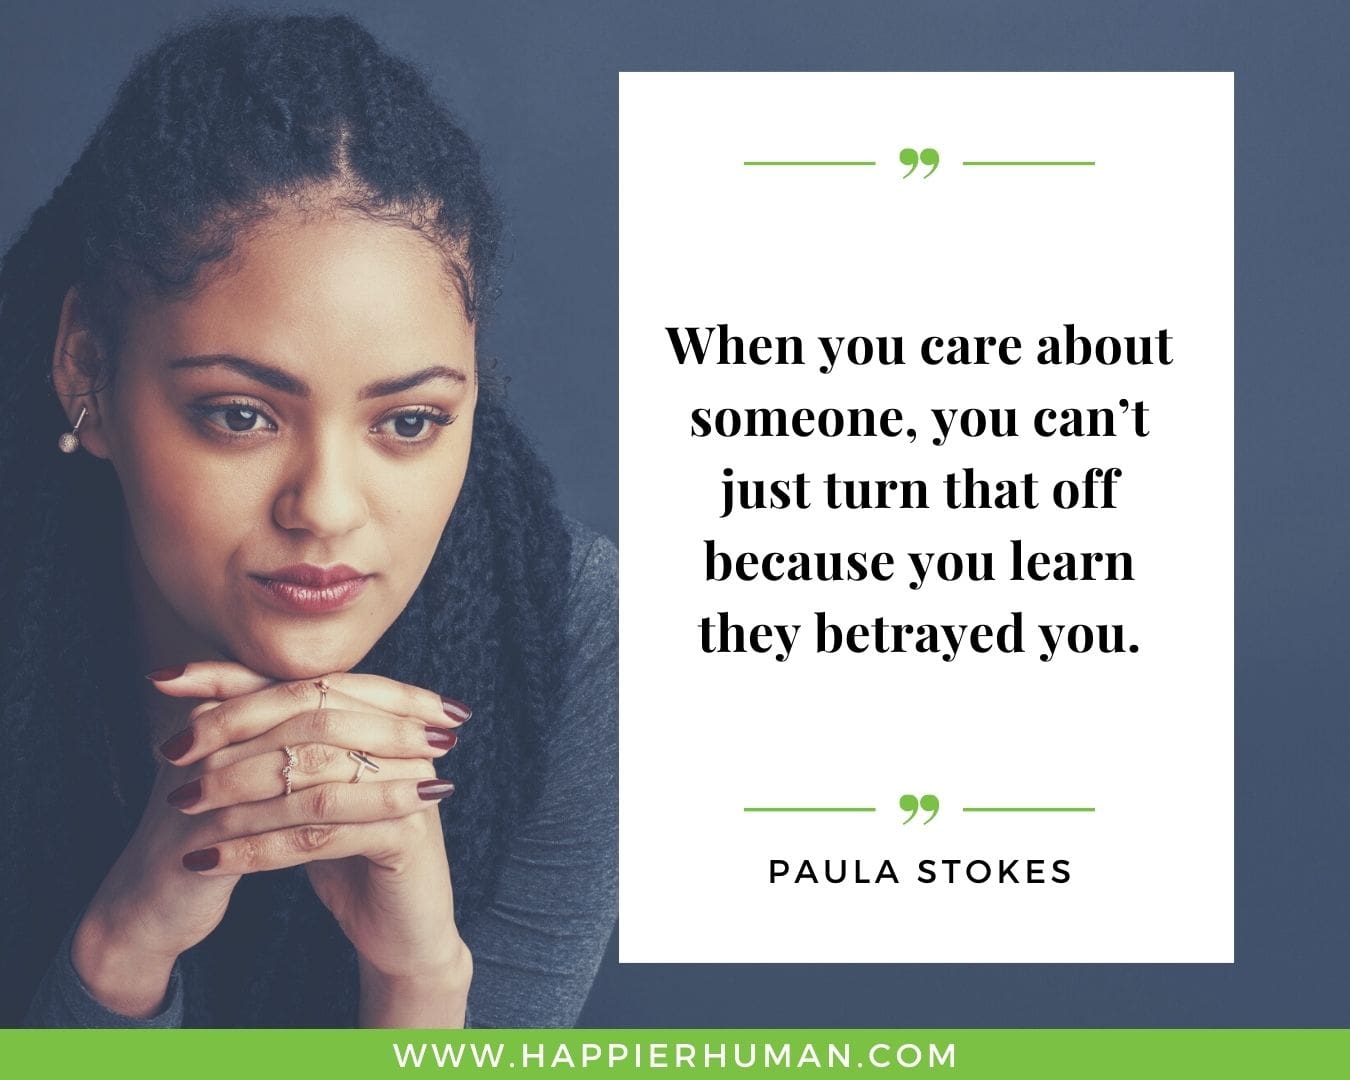 Broken Trust Quotes - “When you care about someone, you can’t just turn that off because you learn they betrayed you.” - Paula Stokes